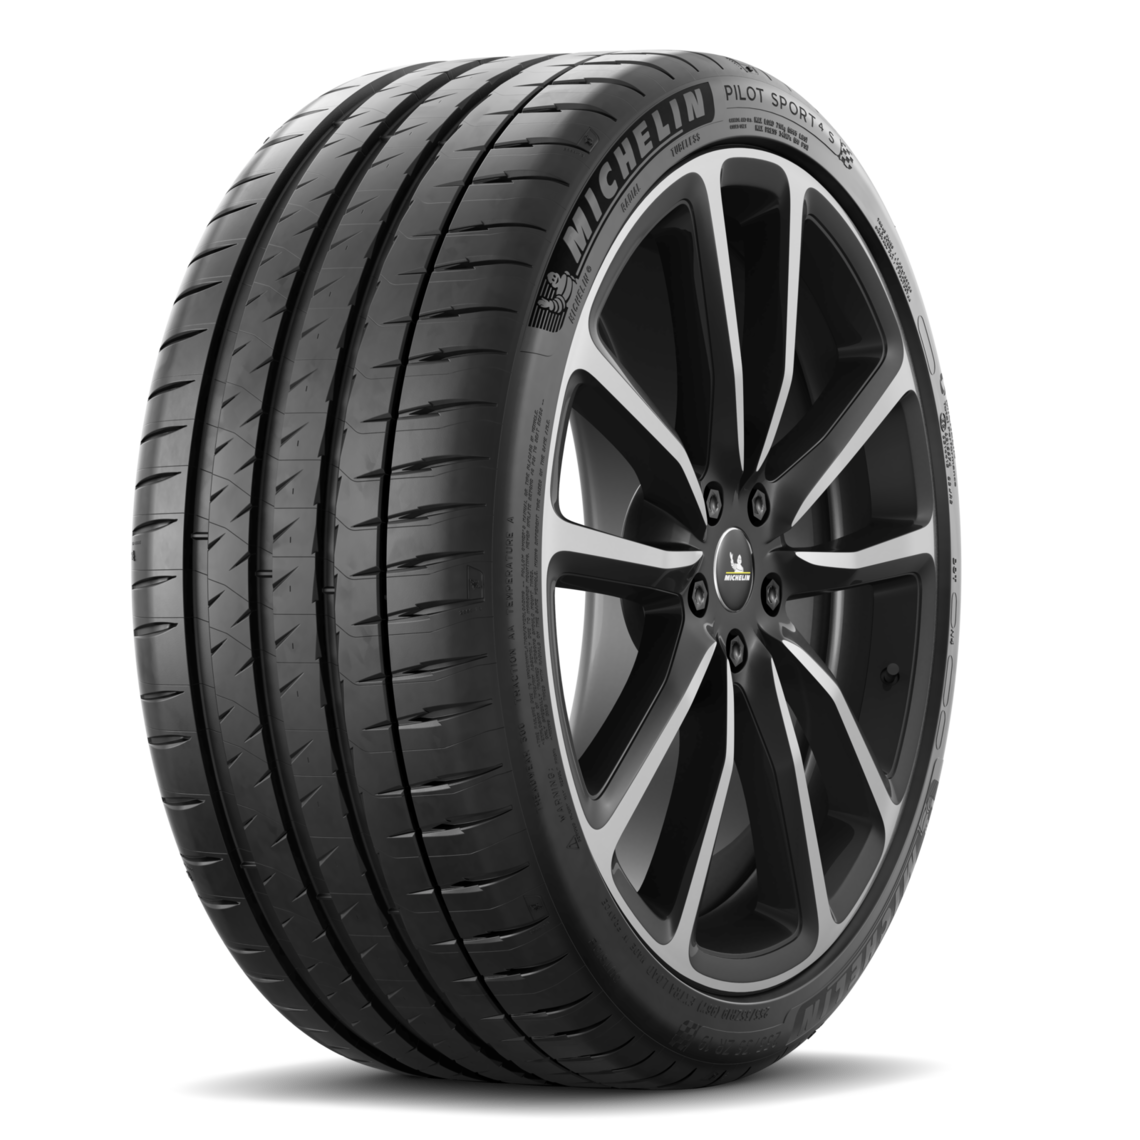 Michelin Pilot Sport 4 S - Tyre Reviews and Tests